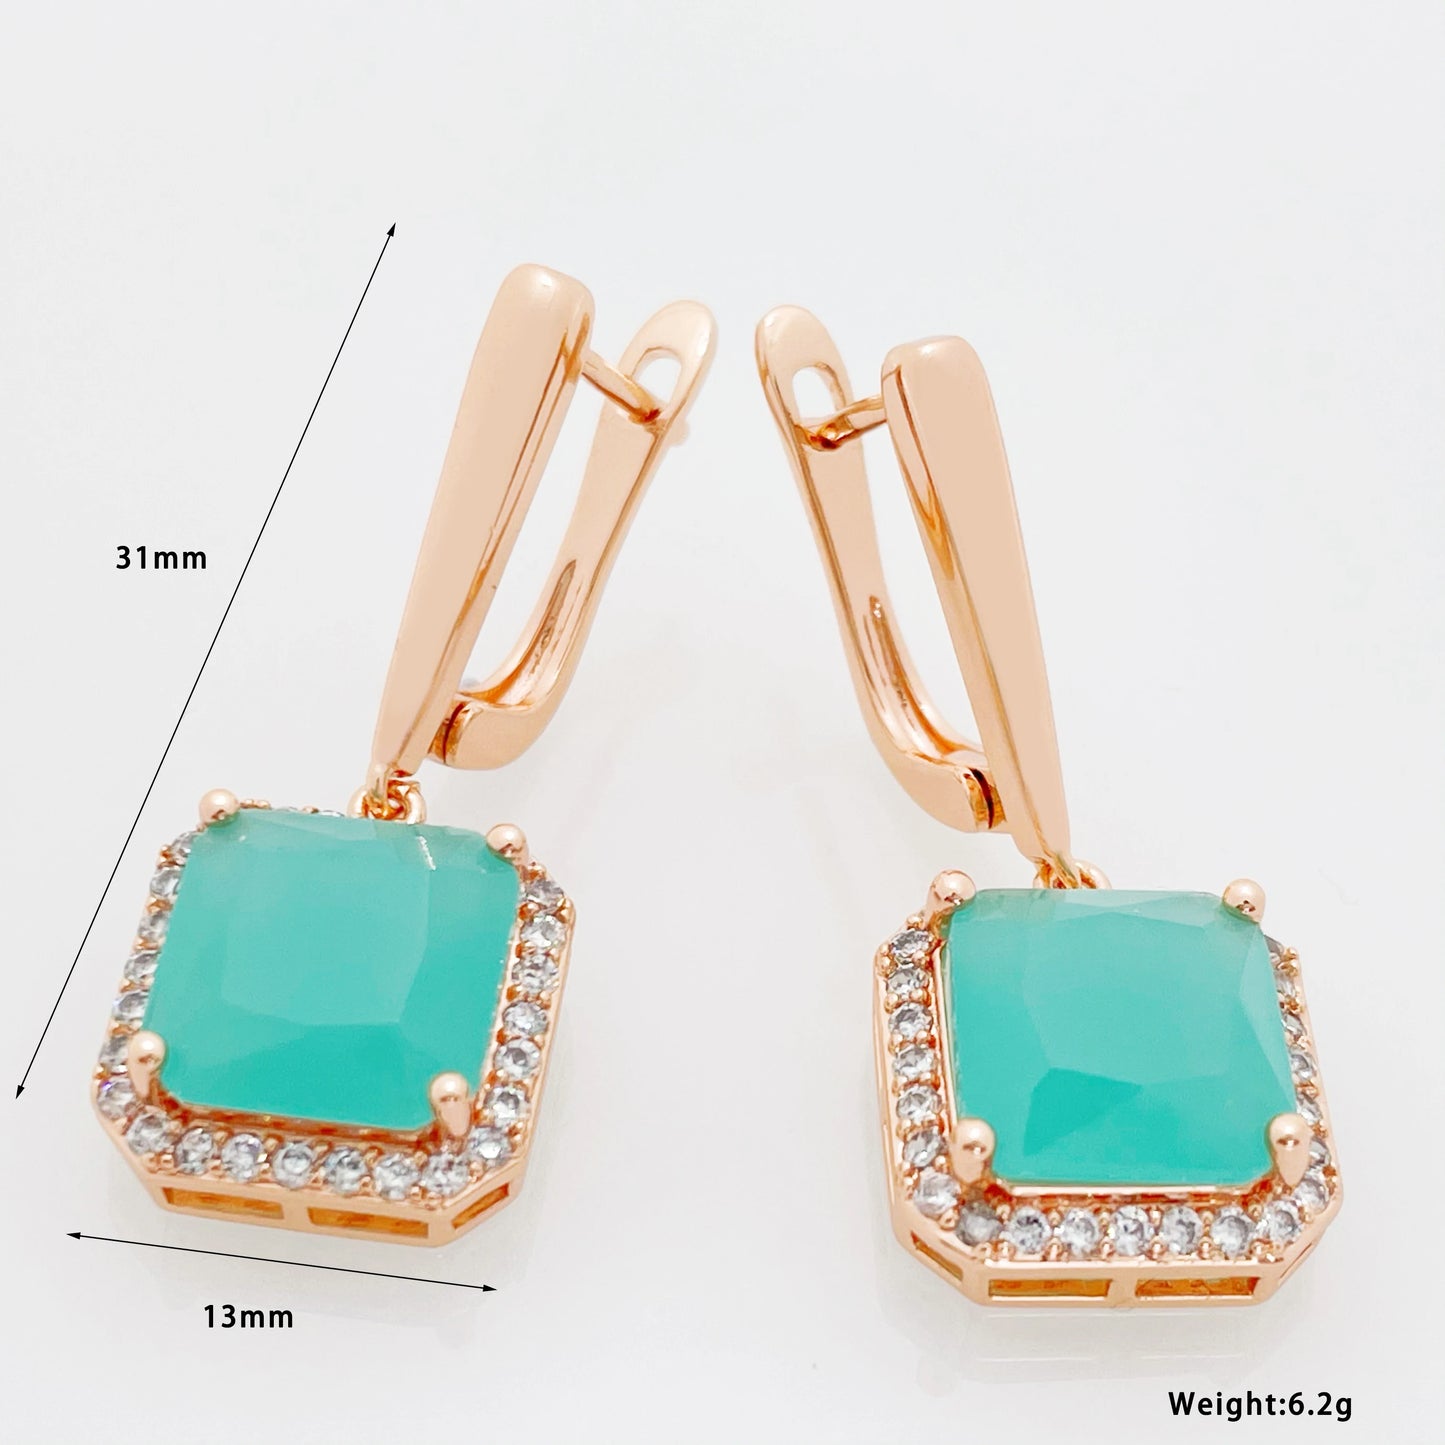 Aomigc Exclusive Square Long Women Fashion 585 Rose Gold Fine Jewelry Cyan/Pink Ice Natural Zircon Gorgeous Dangle Earrings